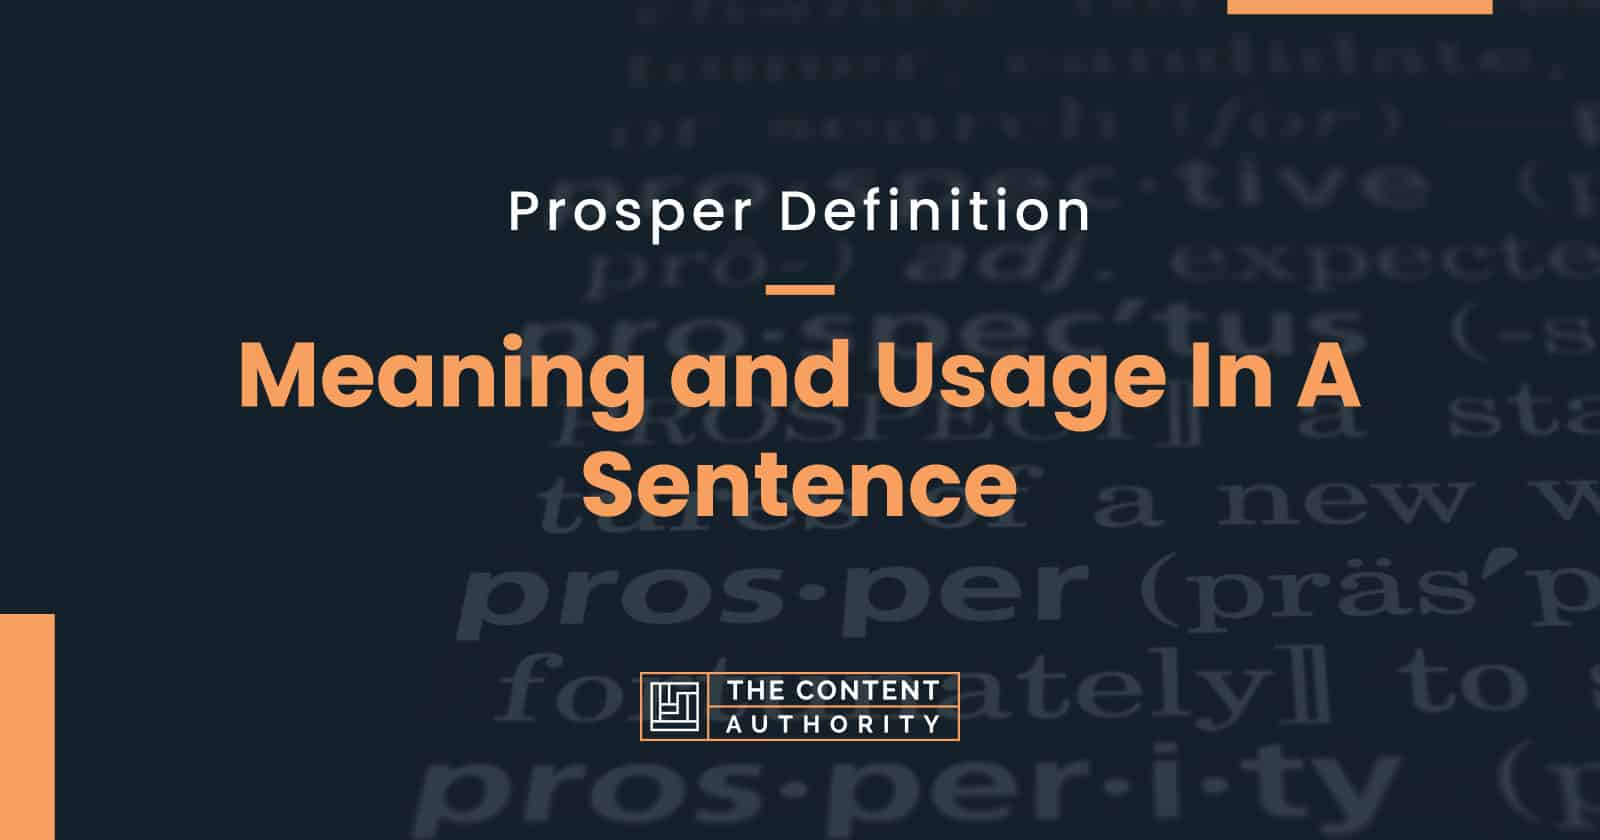 Prosper Definition &#8211; Meaning and Usage In A Sentence